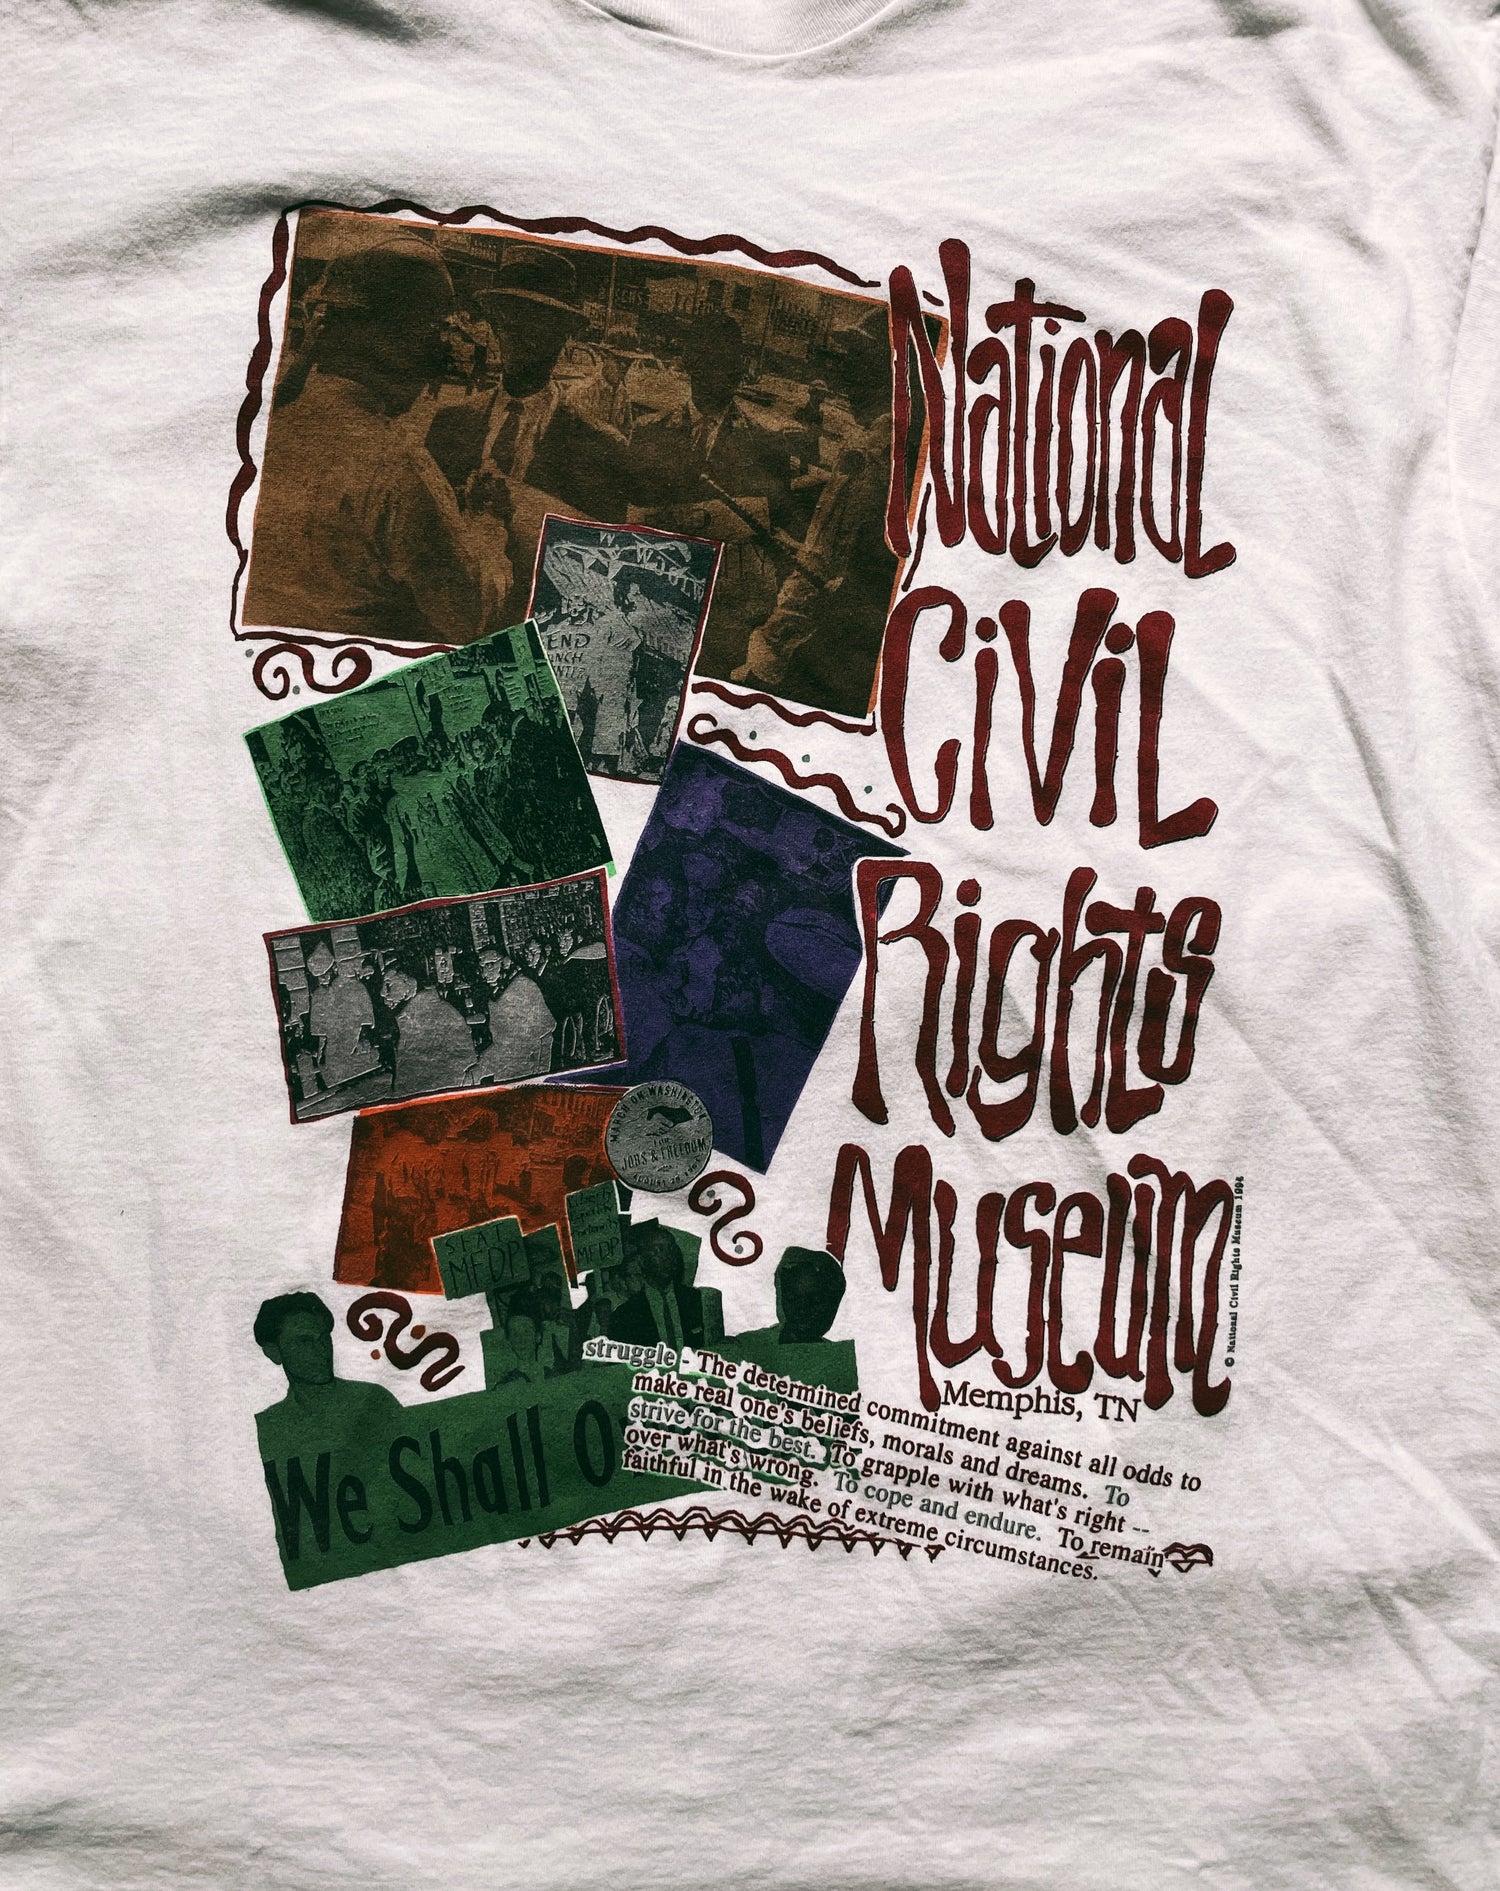 Vintage “National Civil Rights Museum” T-Shirt (1990’s)